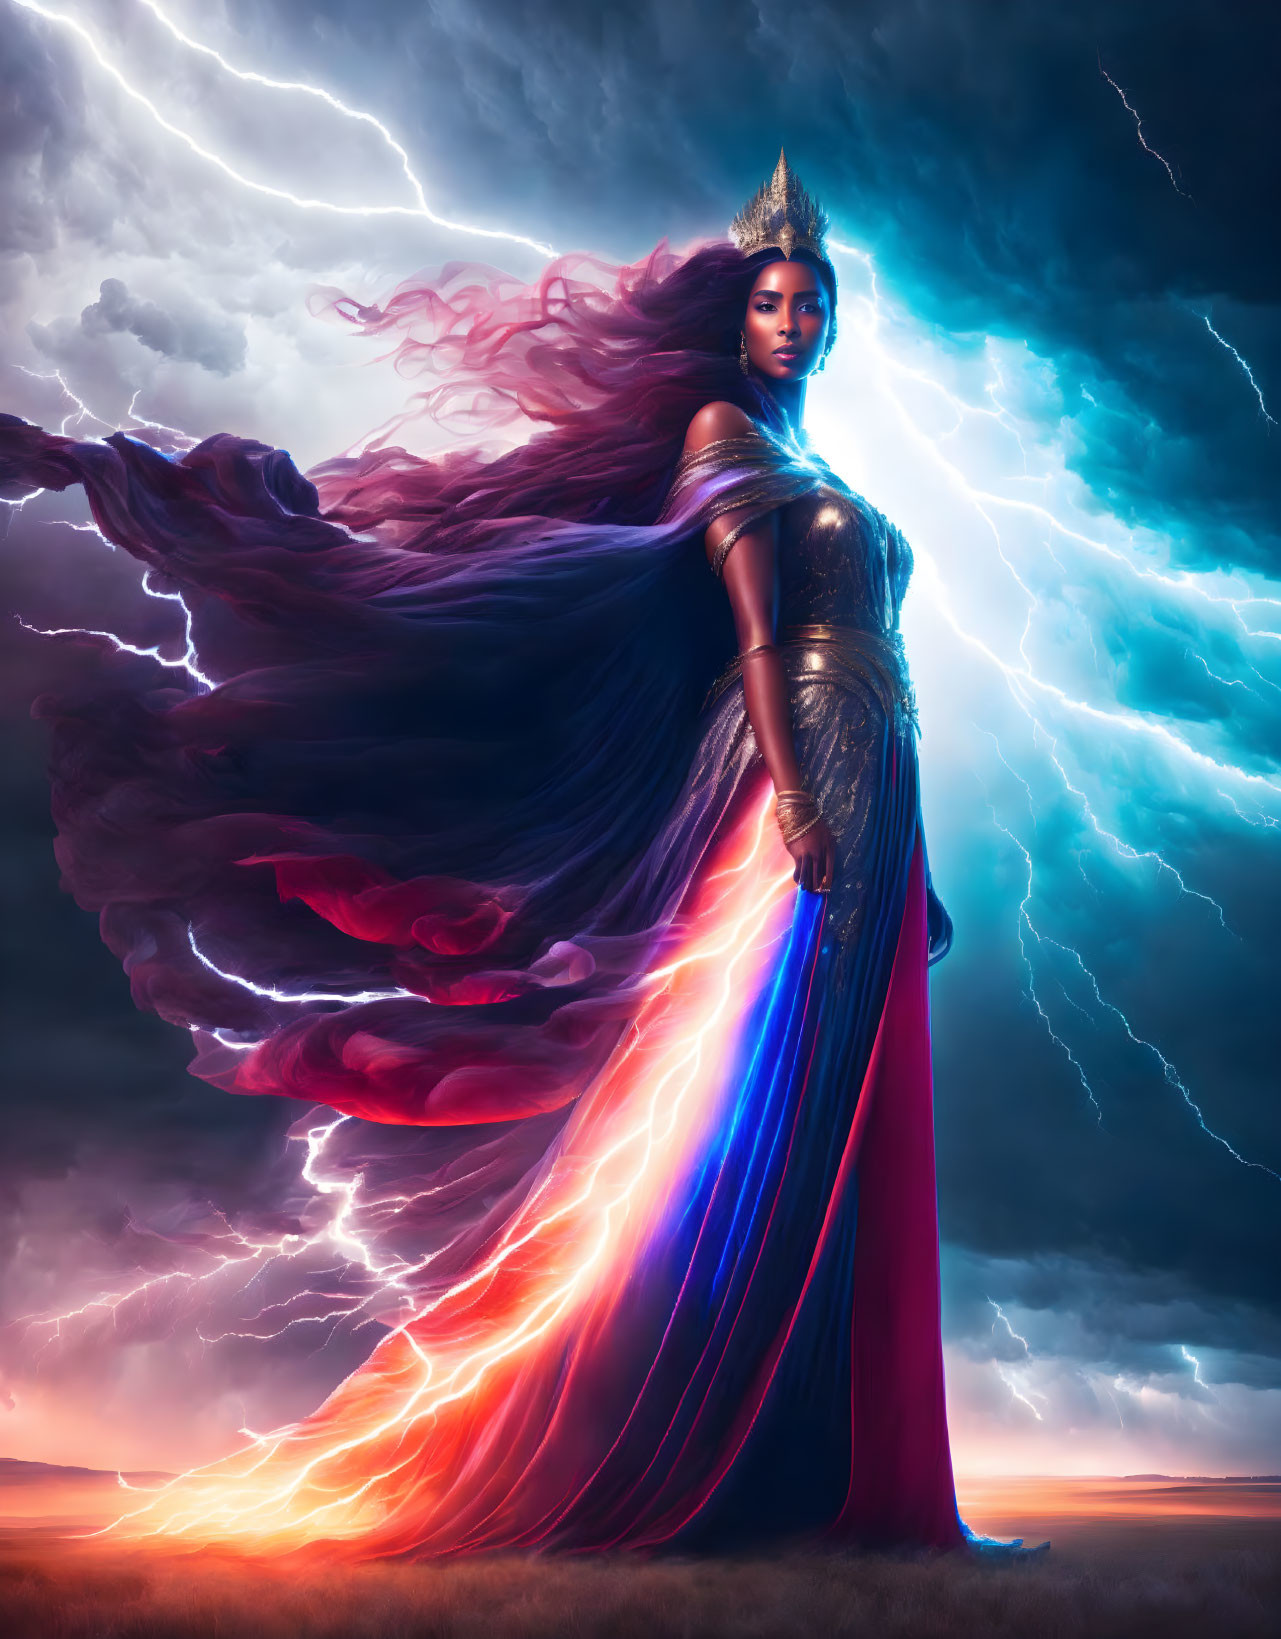 Goddess of the Electric Storm